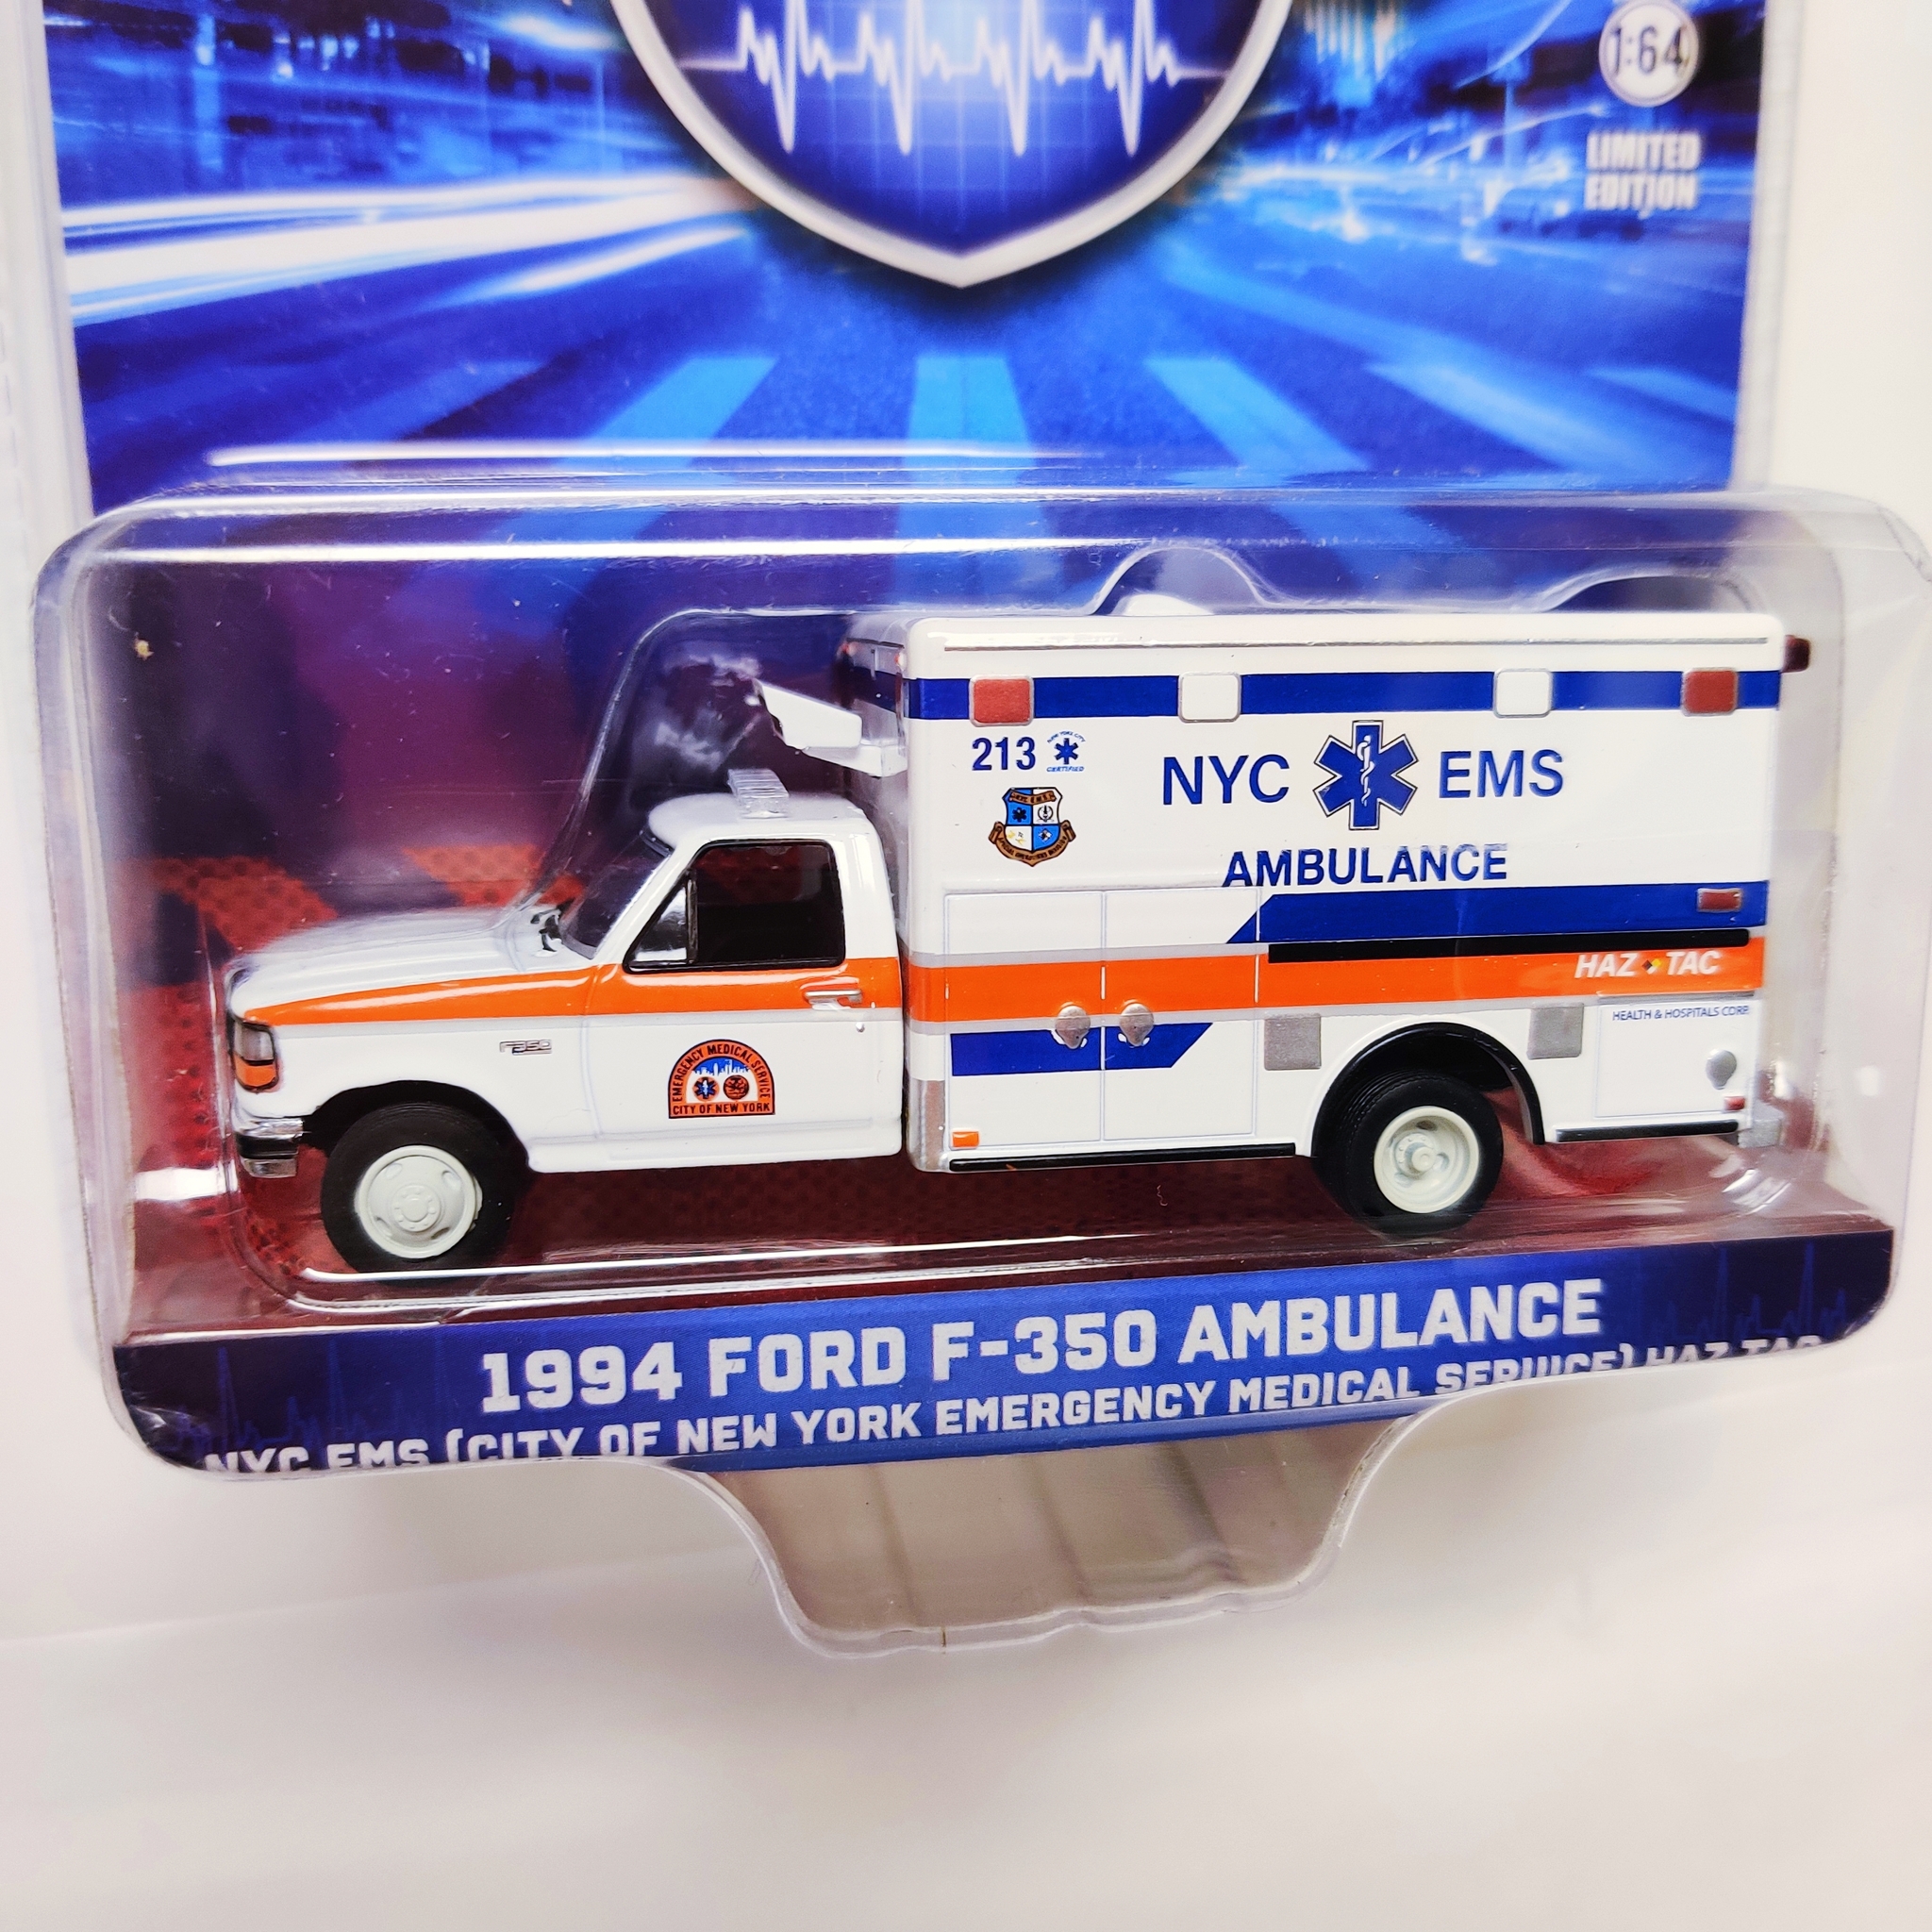 Skala 1/64 Greenlight Excl. "First Responders" 1994 Ford F-350 Ambulance Lim.Ed